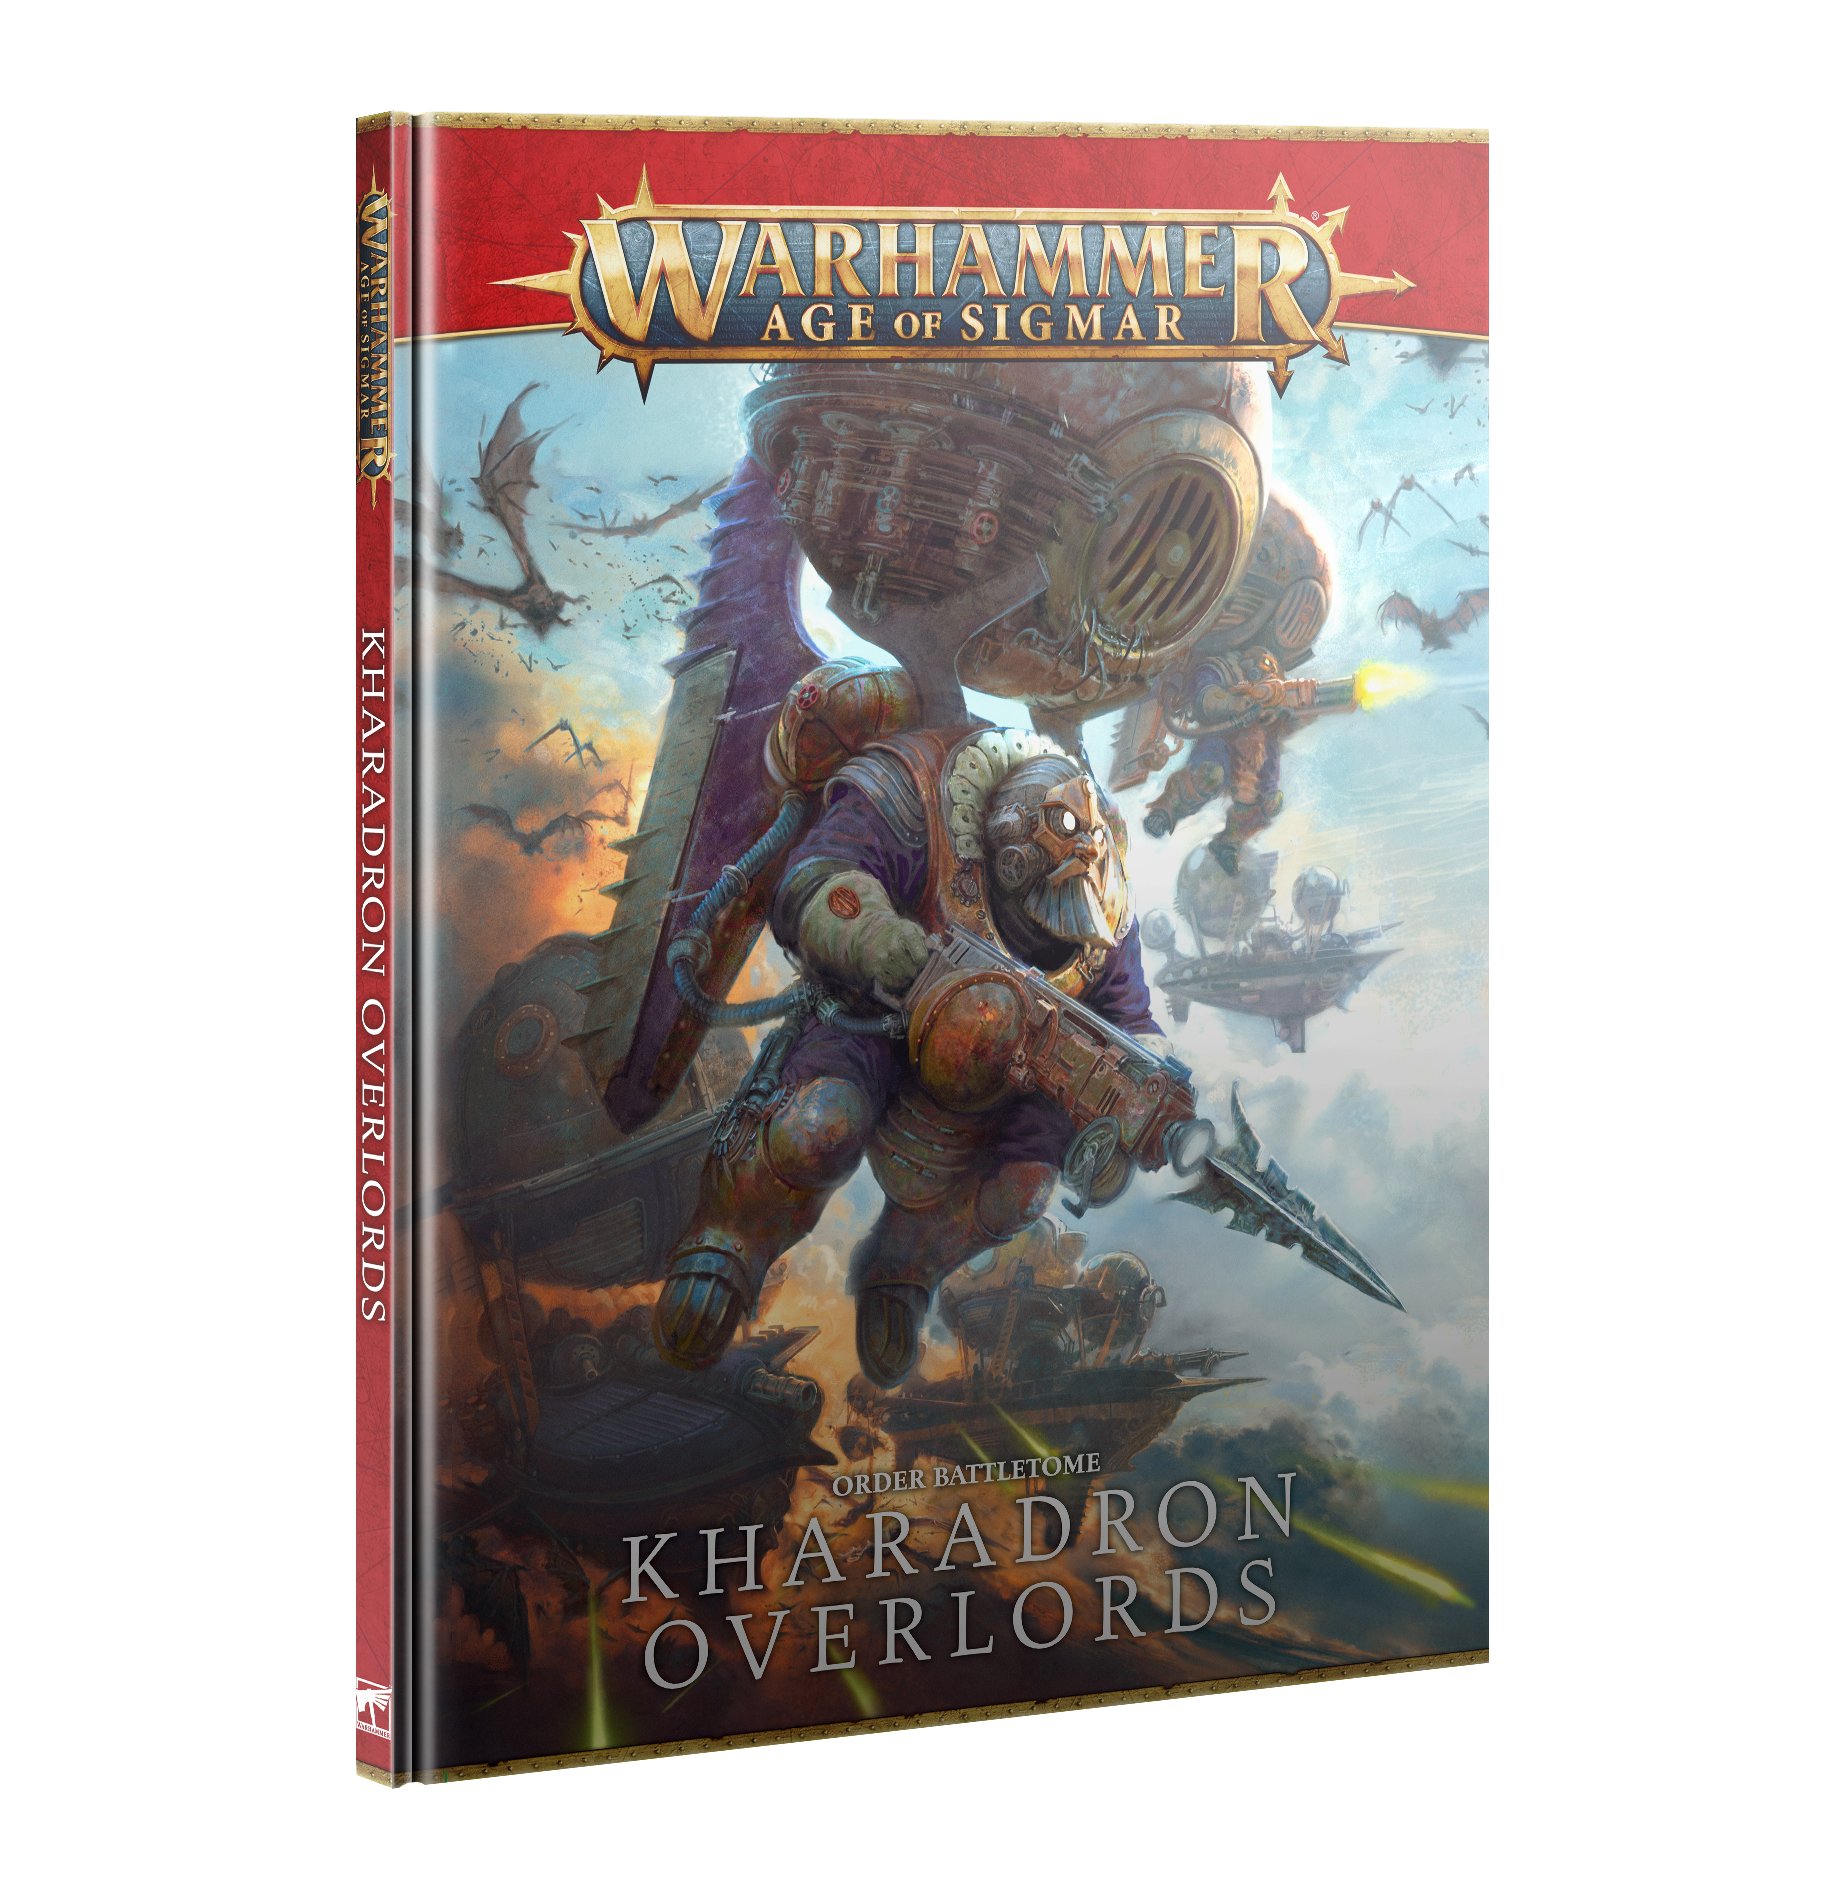 kharadron overlords cover